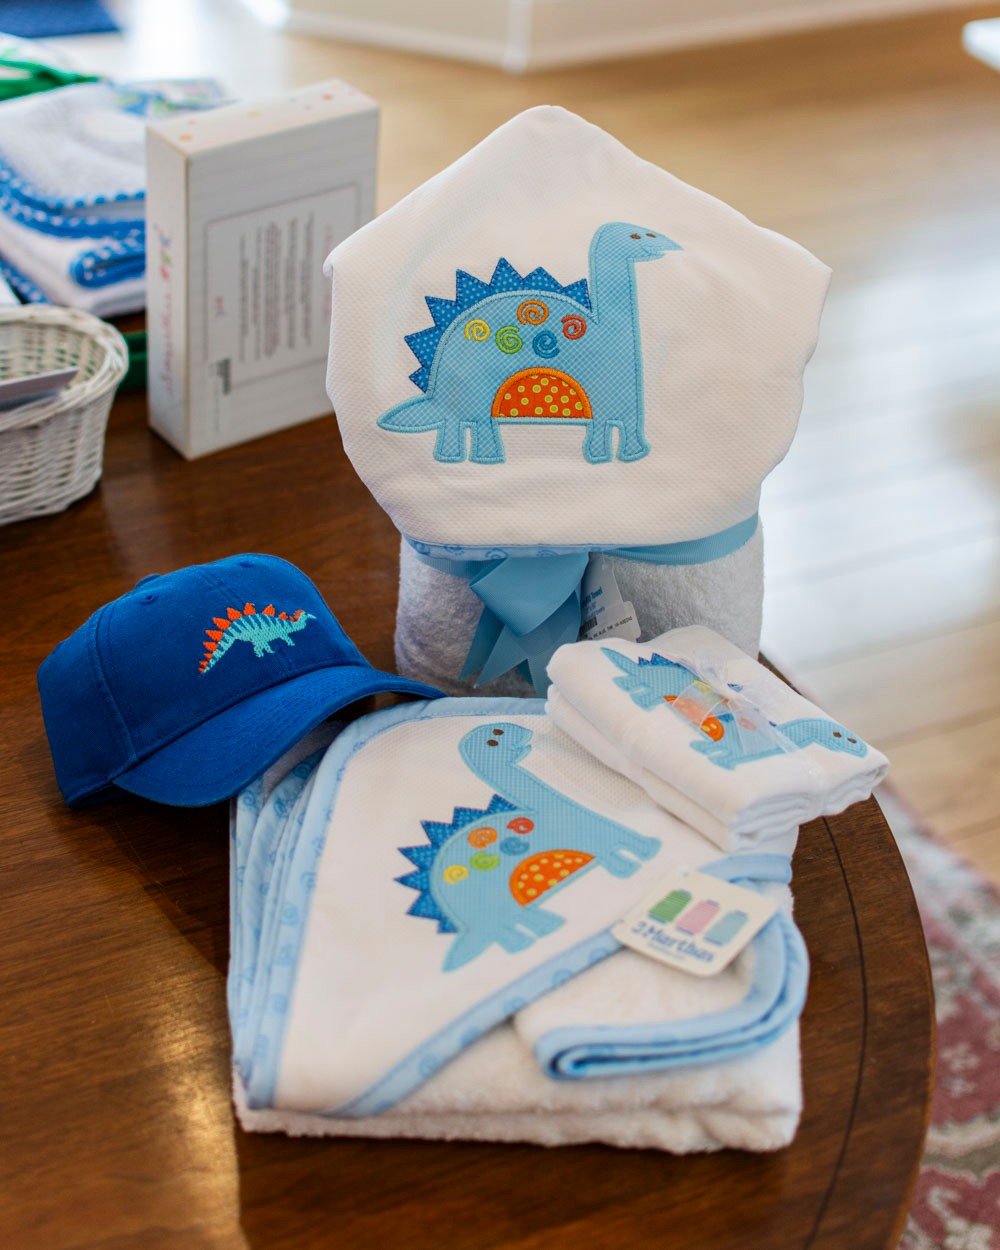 Let's look at a few bundles around the shop, including these dinosaur sets from Baby Luigi, 3 Marthas and Harding Lane. We also spy some blue fish bundles and pink fish bundles for summer!